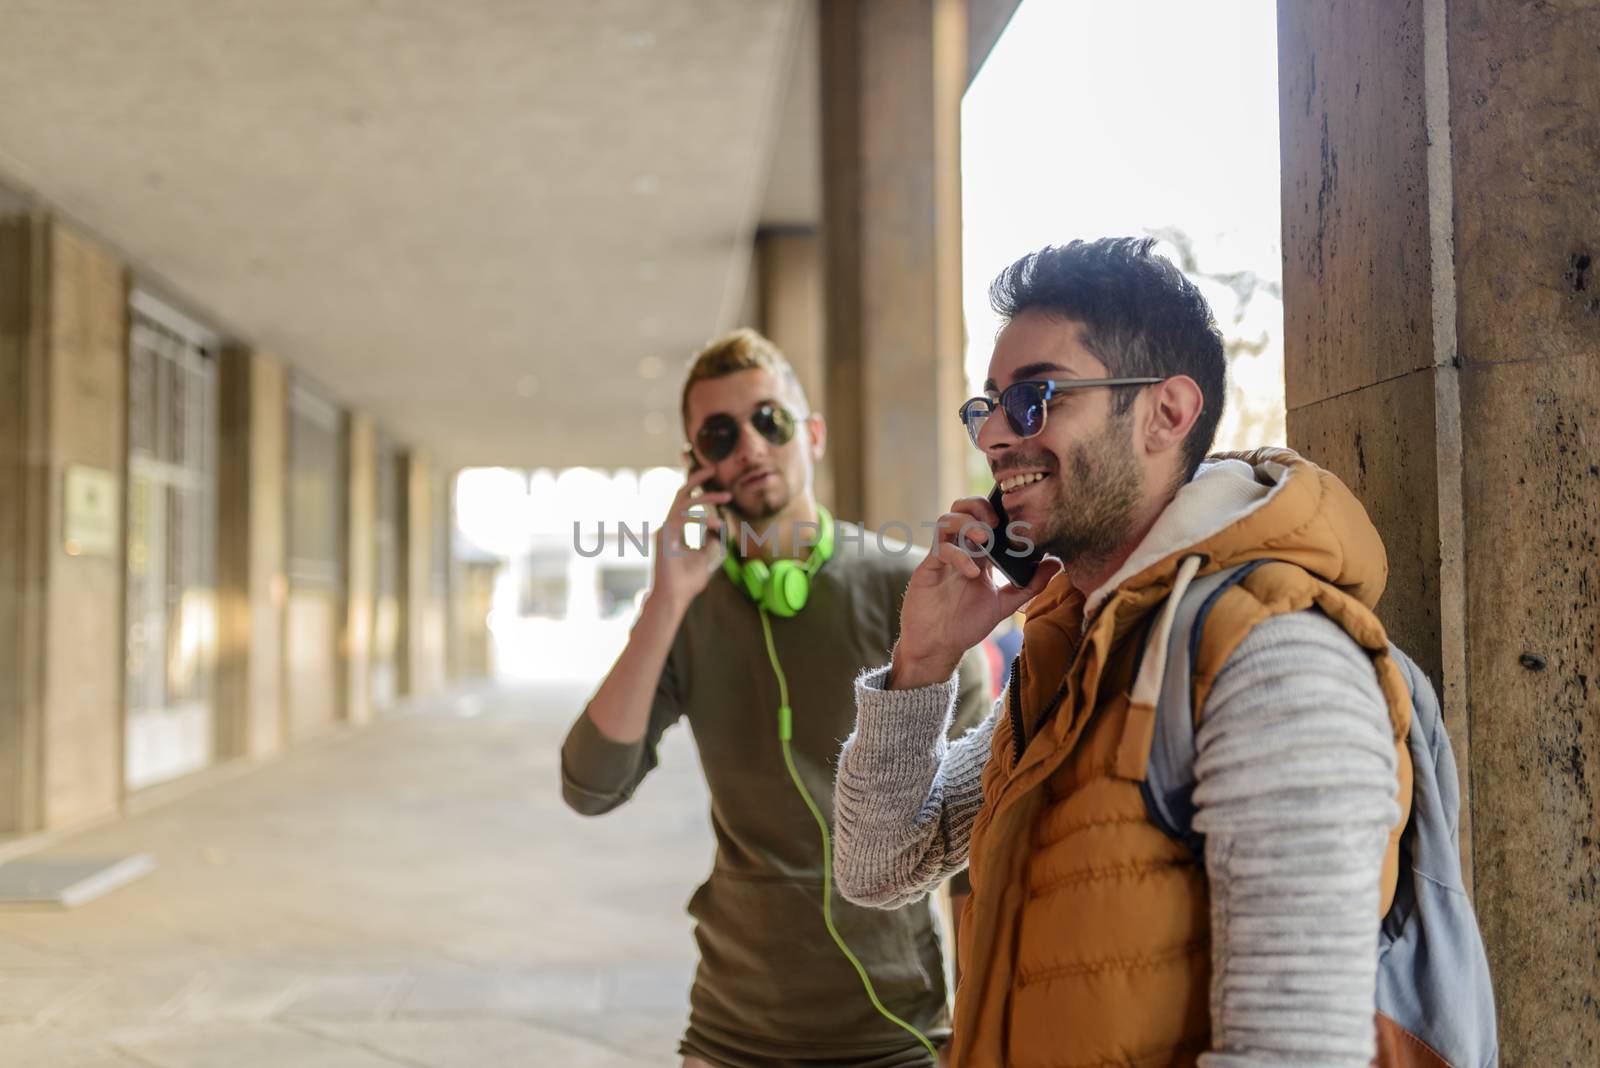 Two young men talking on the phone in city passage